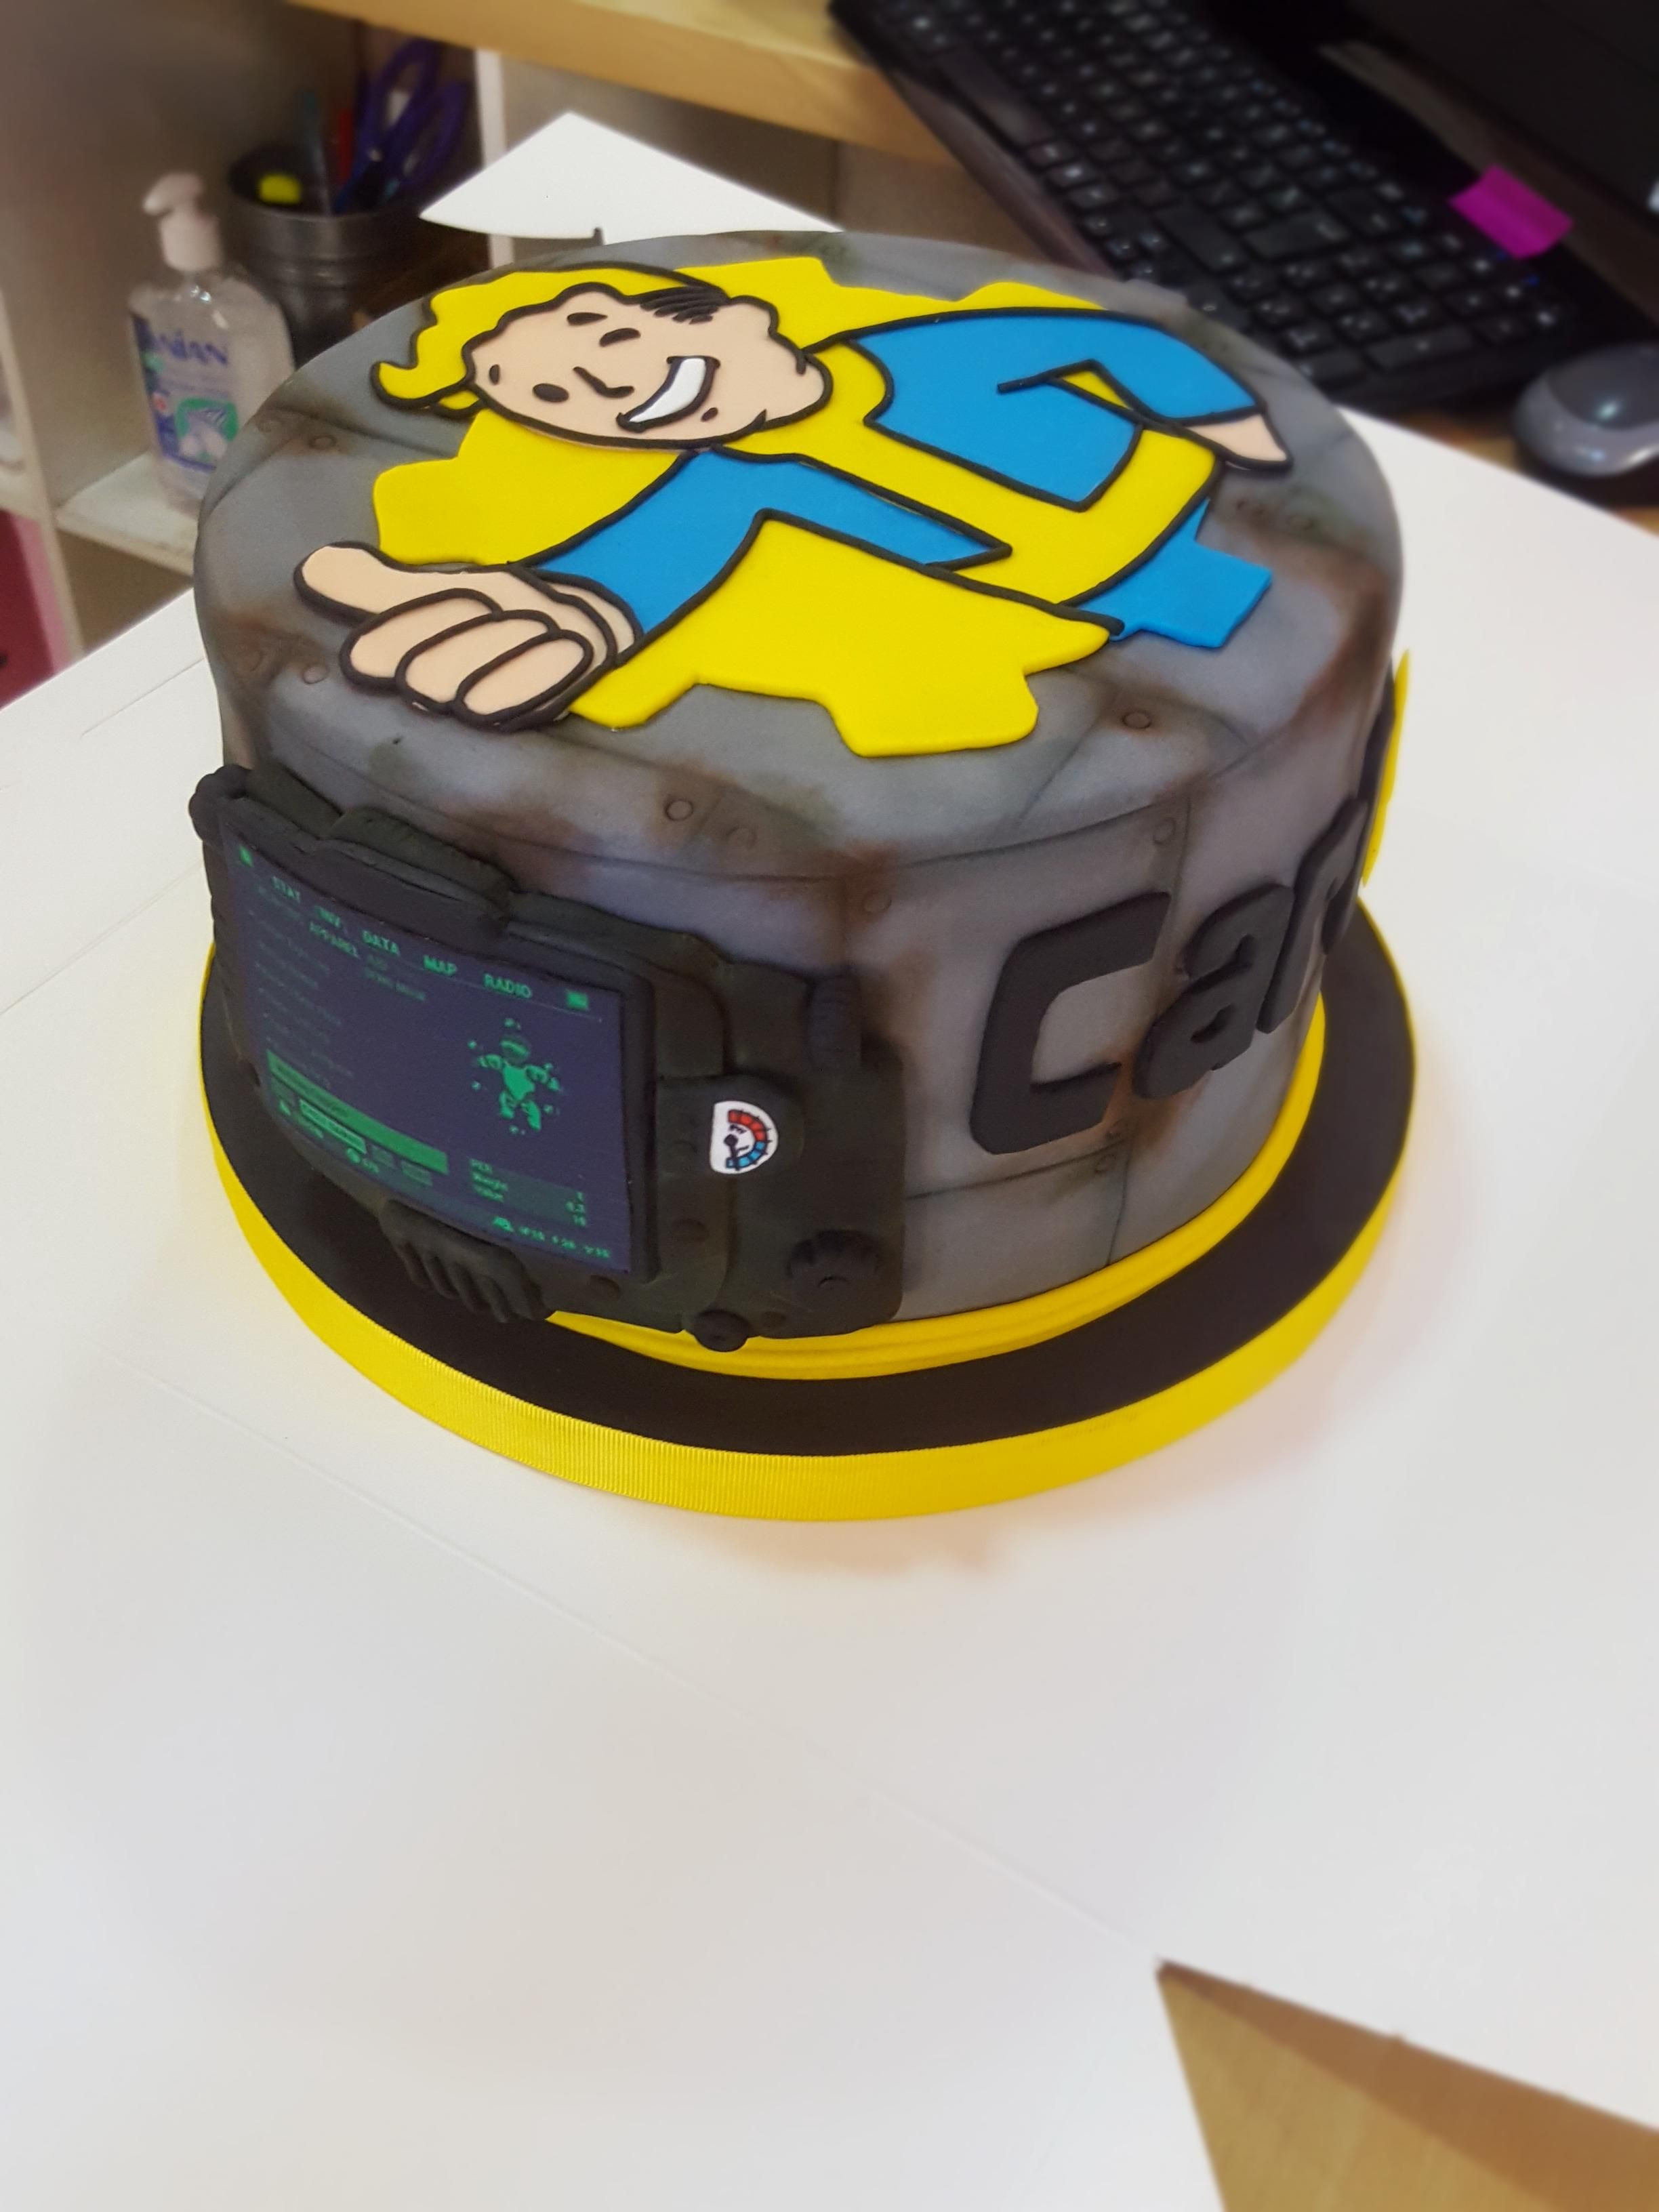 Fallout Birthday Cake
 My boyfriend almost cried when he saw his birthday cake